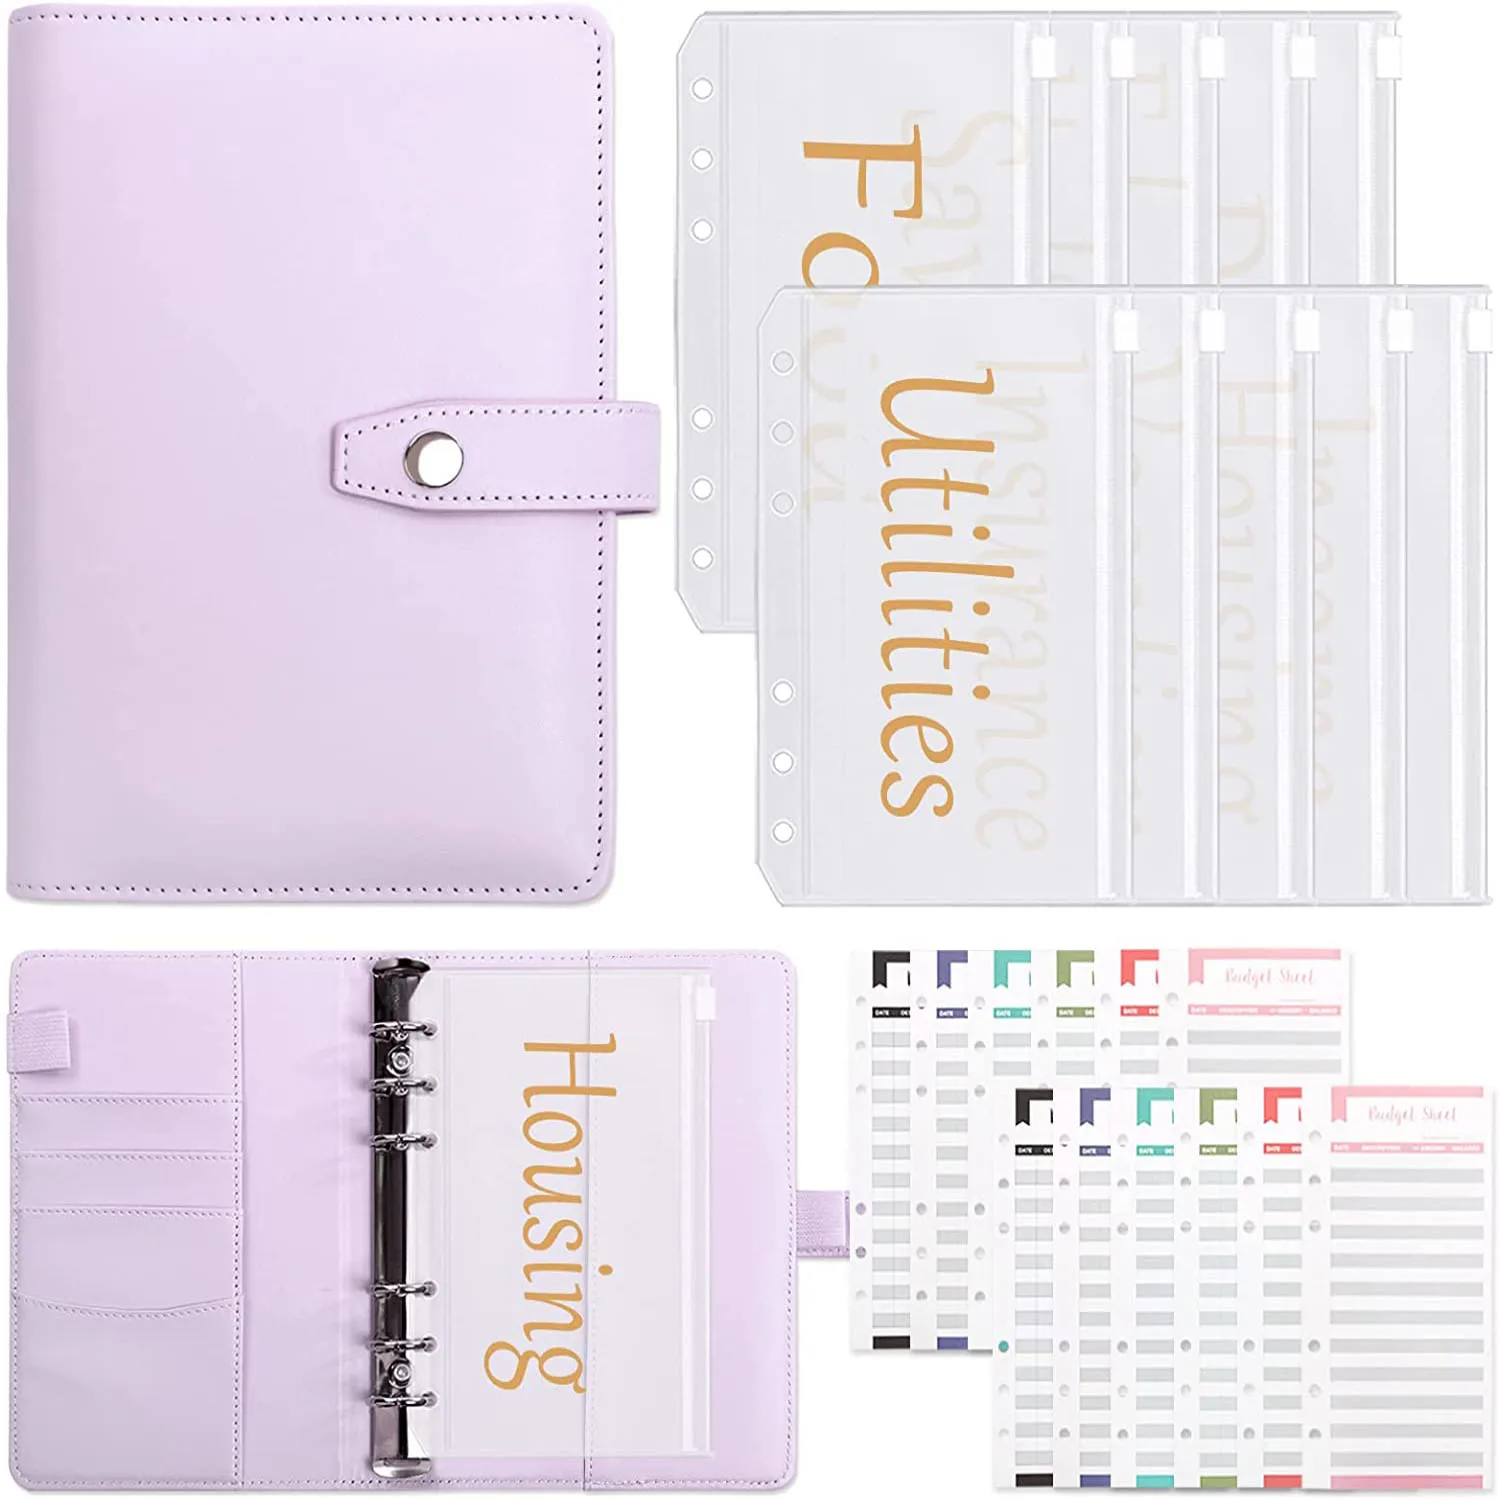 A6 Budget Binder with 10pcs Pre-printed Cash Envelopes for Budgeting,12 Expense Budget Sheets,Planner Organizer for Saving Money a6 pu leather binder set cash envelopes planner organizer for budgeting with binder pockets budget sheets filler paper stickers